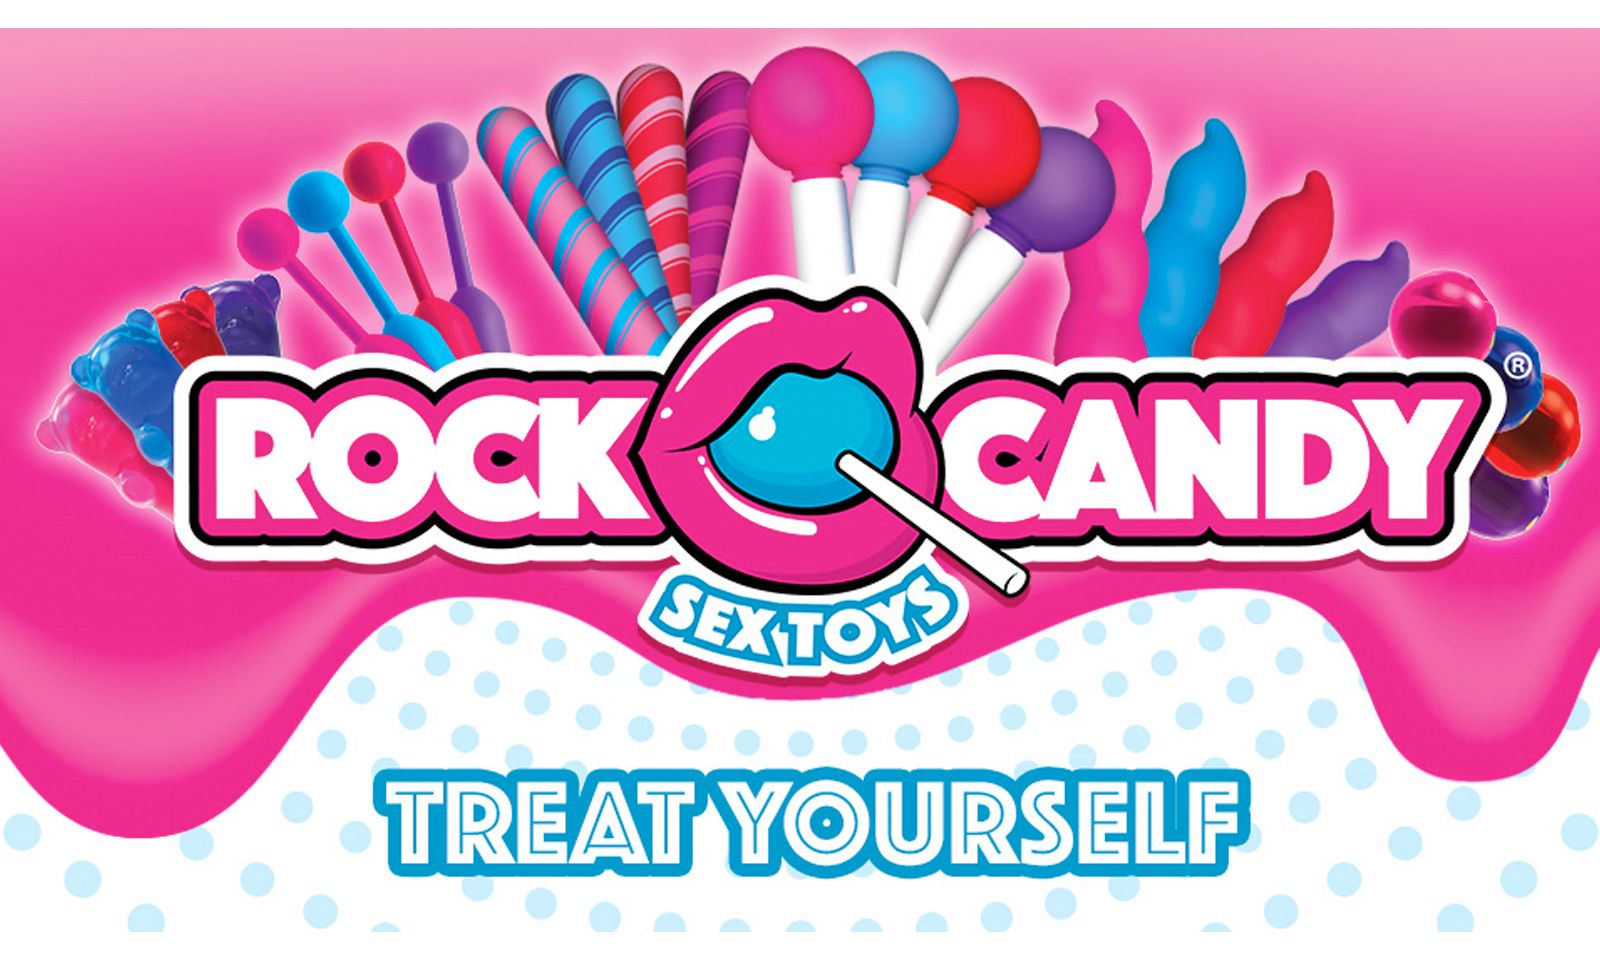 Rock Candy Toys Make Their Way to Retailers